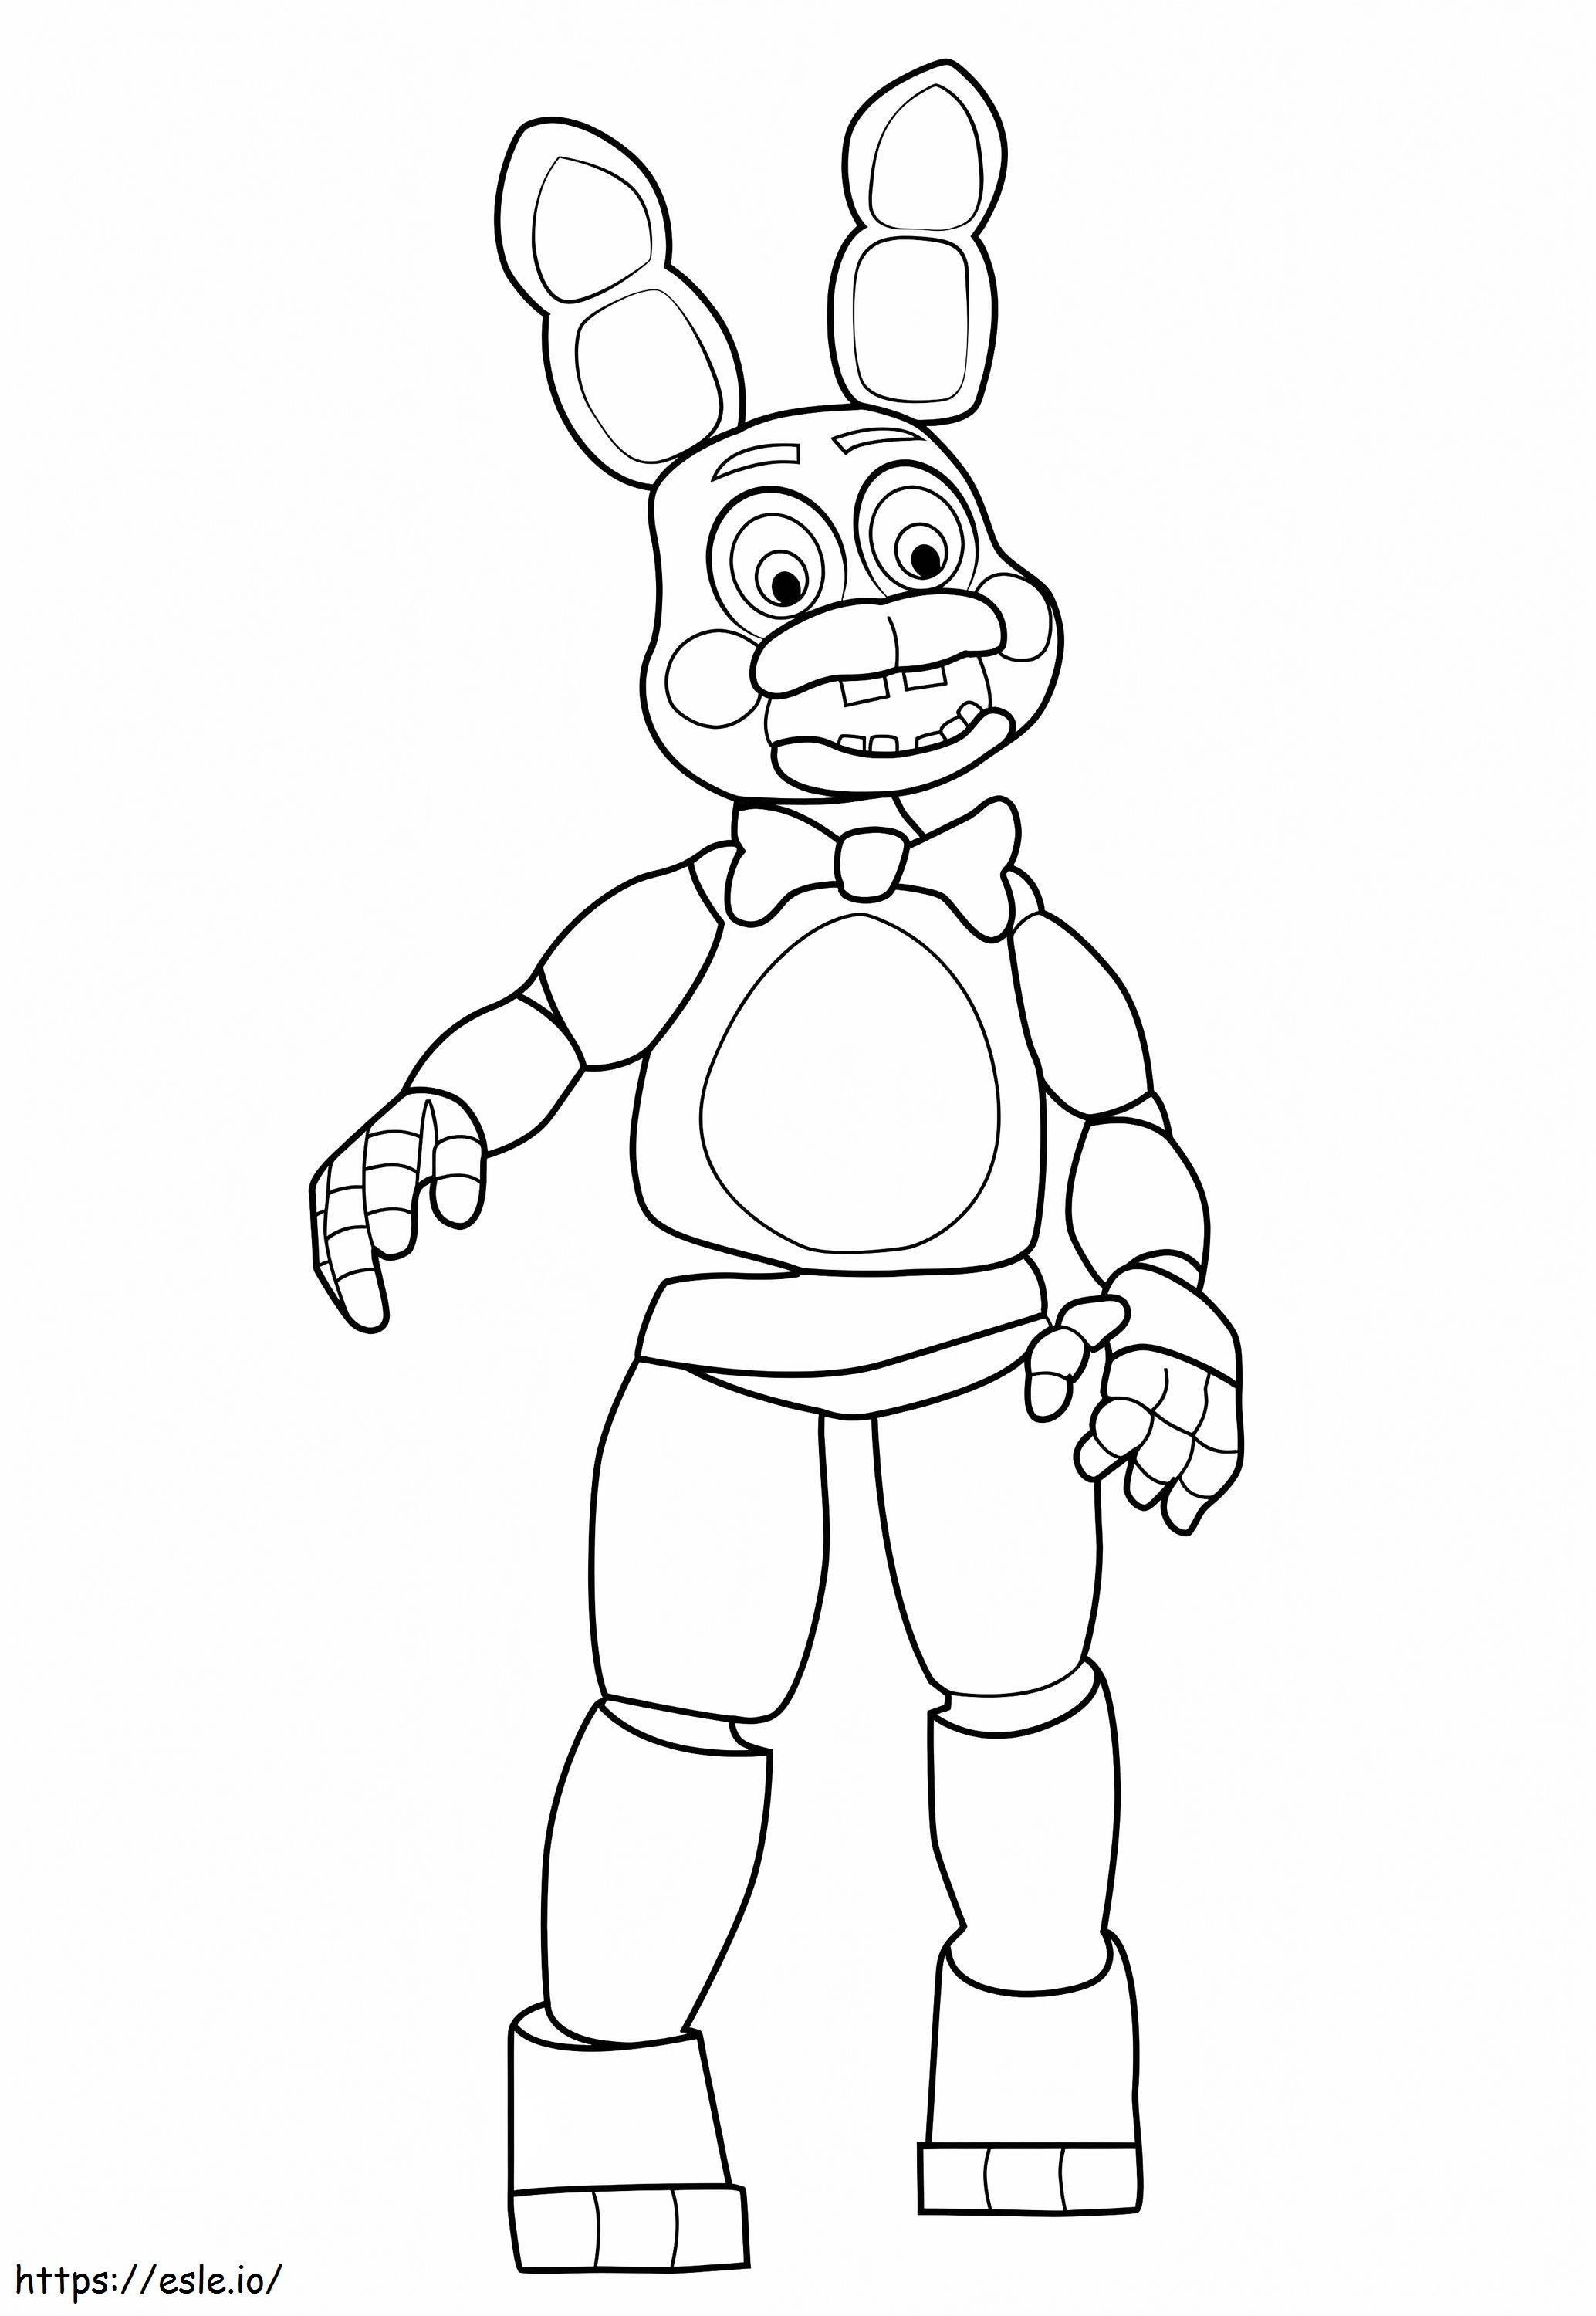 Toy Bonnie FNAF coloring page